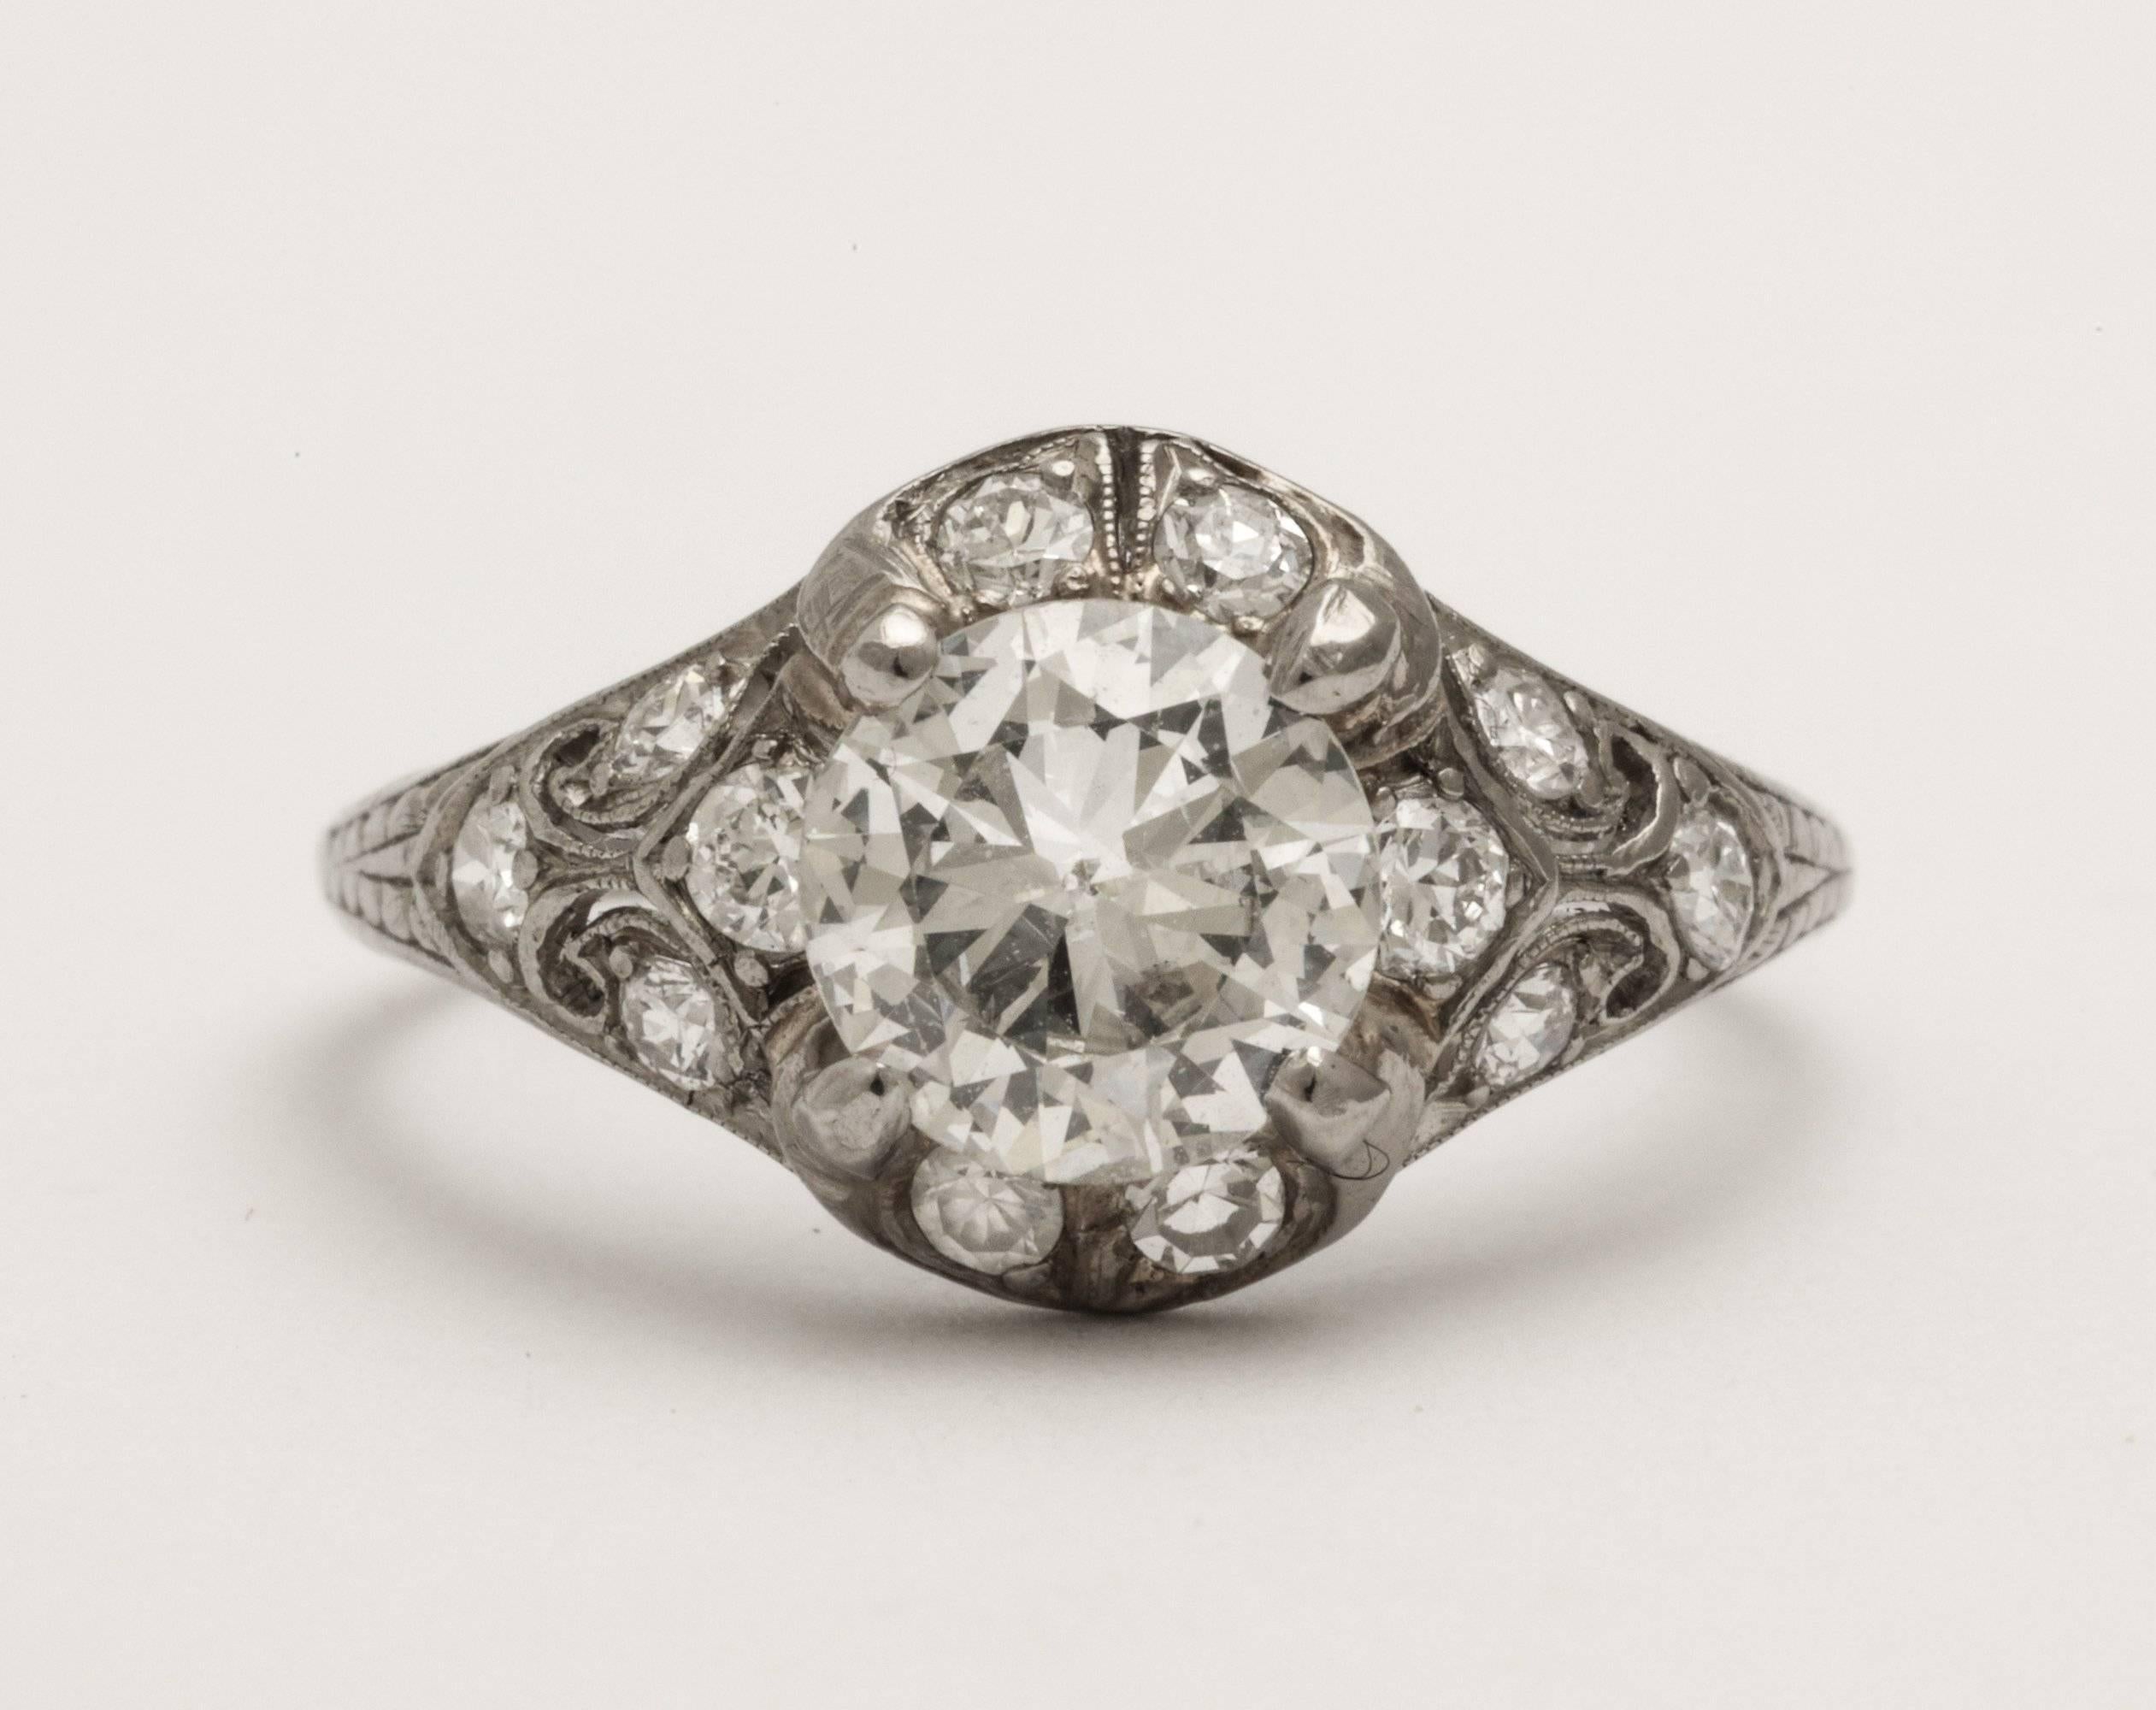 A Classic antique platinum engagement ring with a wonderful centre diamond (1.10 cts) surrounded by smaller diamonds on an elaborately decorated and pierced mount.